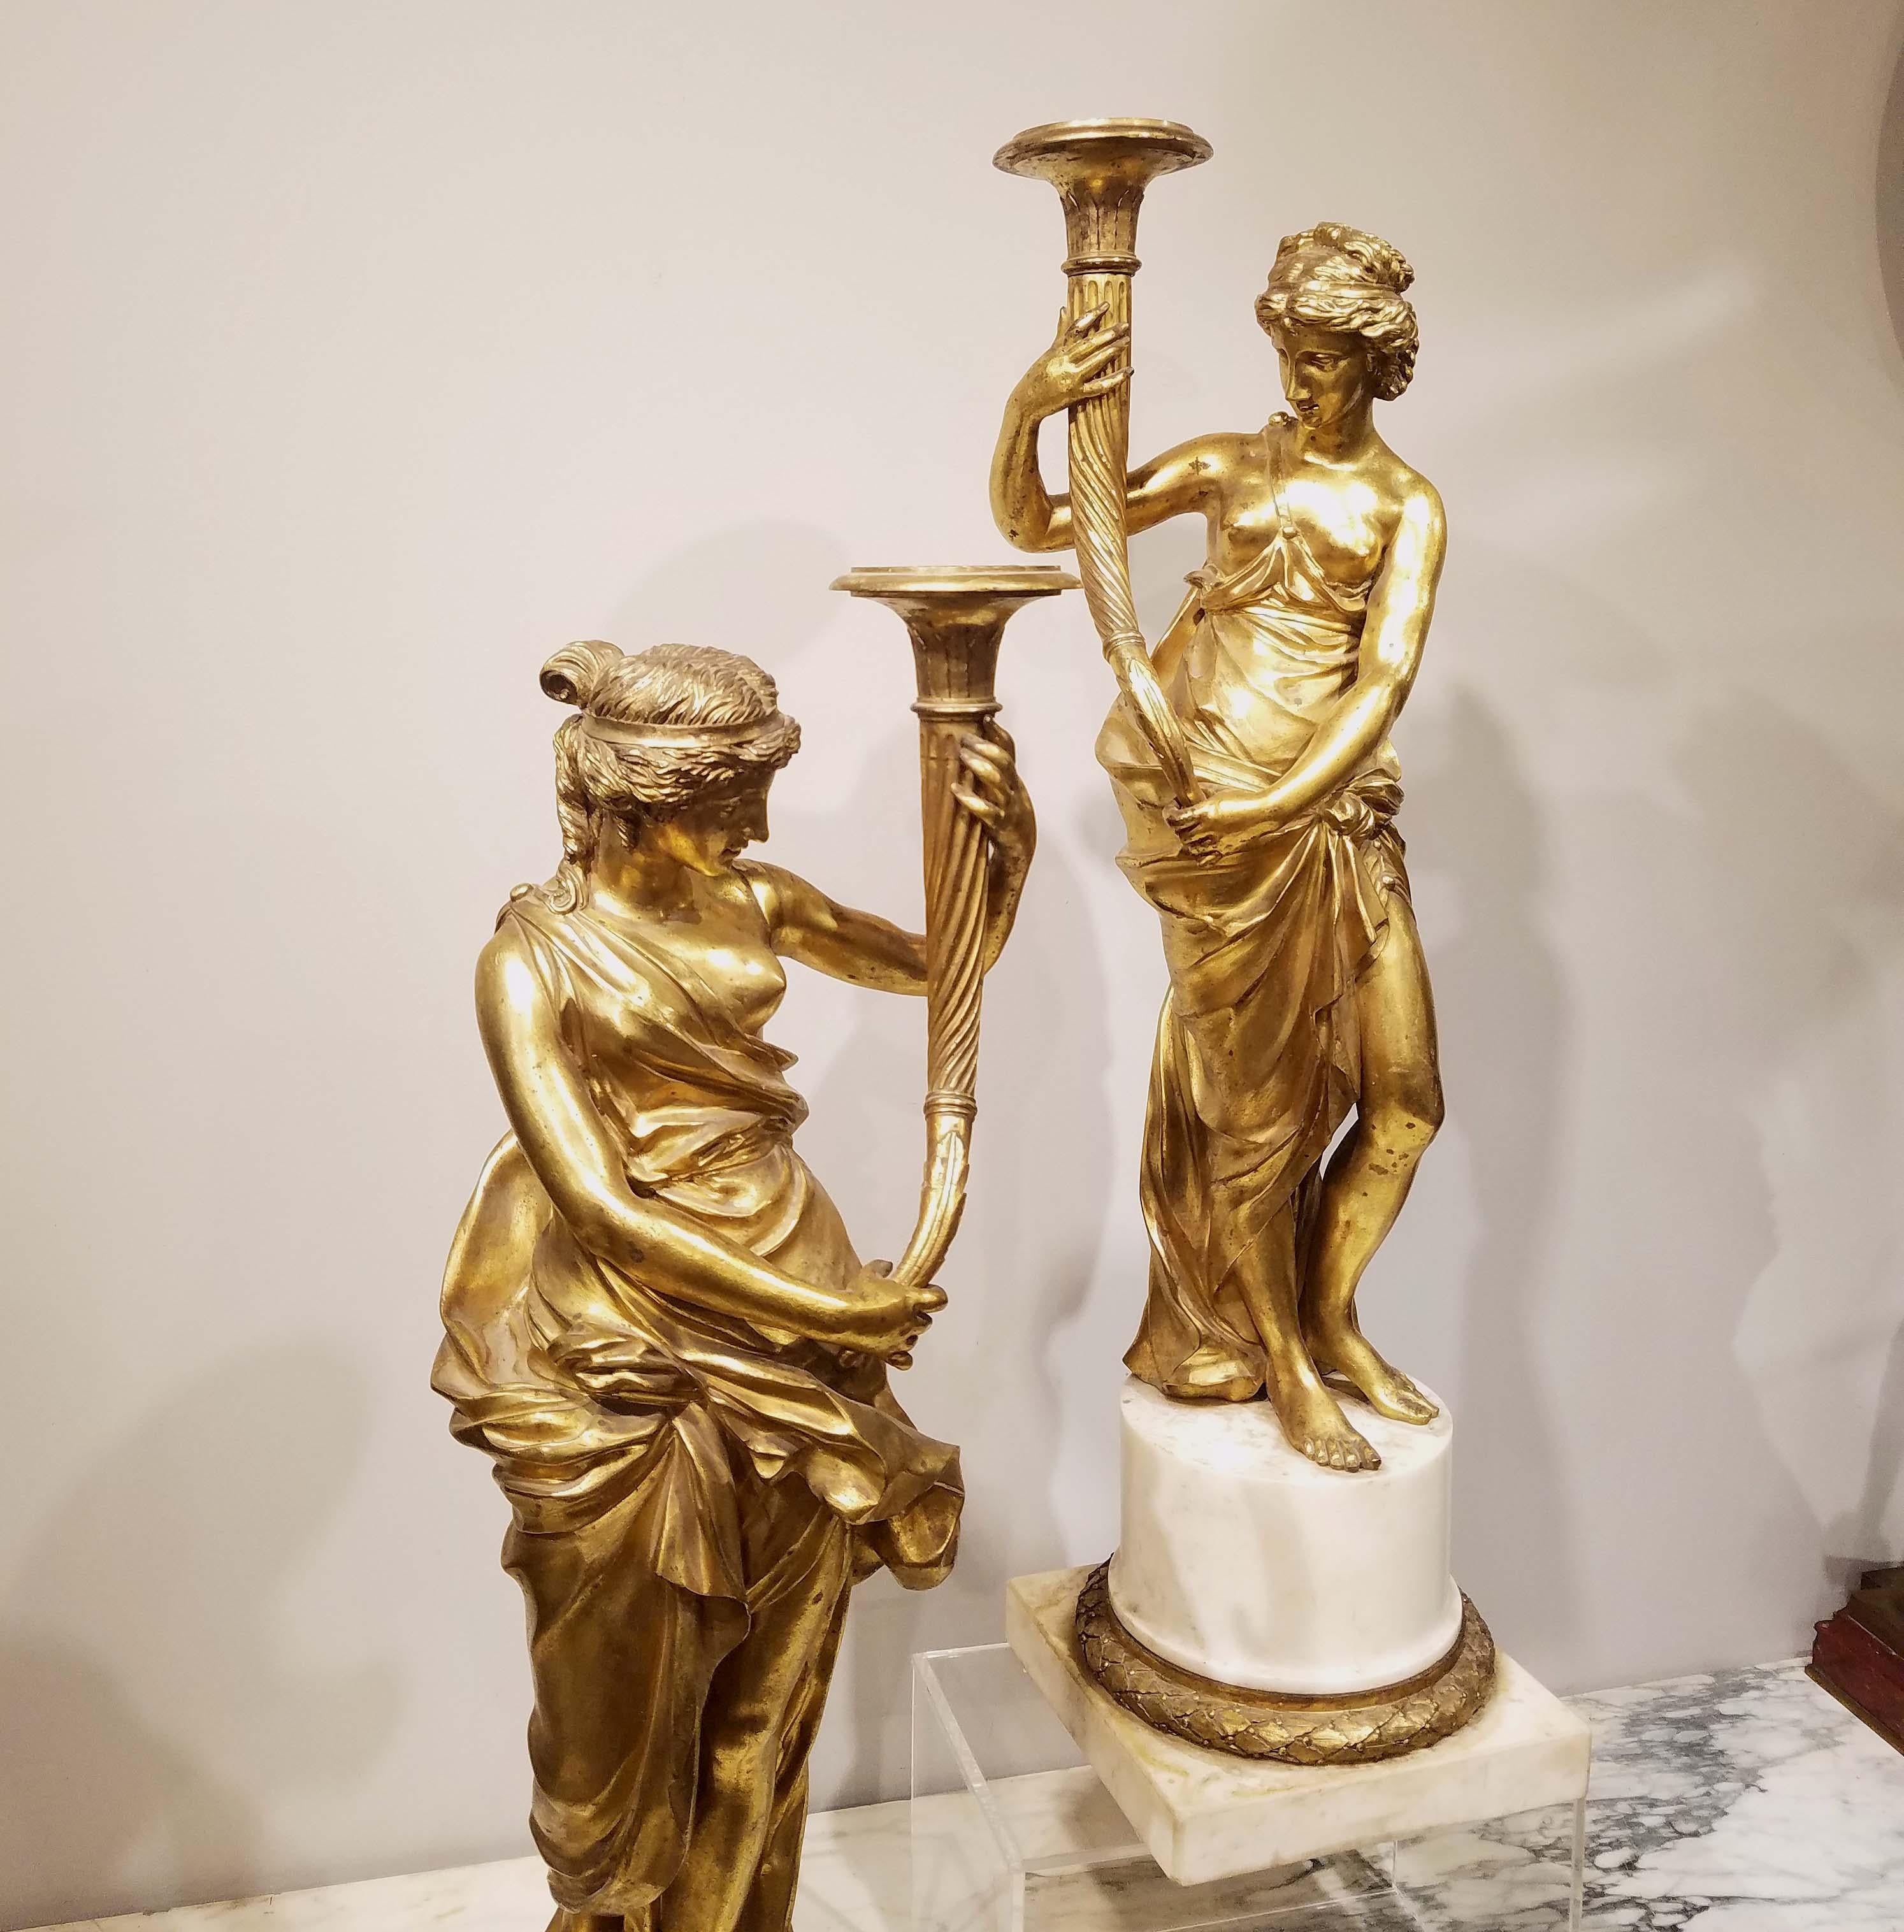 Pair of Louis XVI gilt bronze candelabras. On white marble bases. Great quality with good chasing. Measures: 26.25